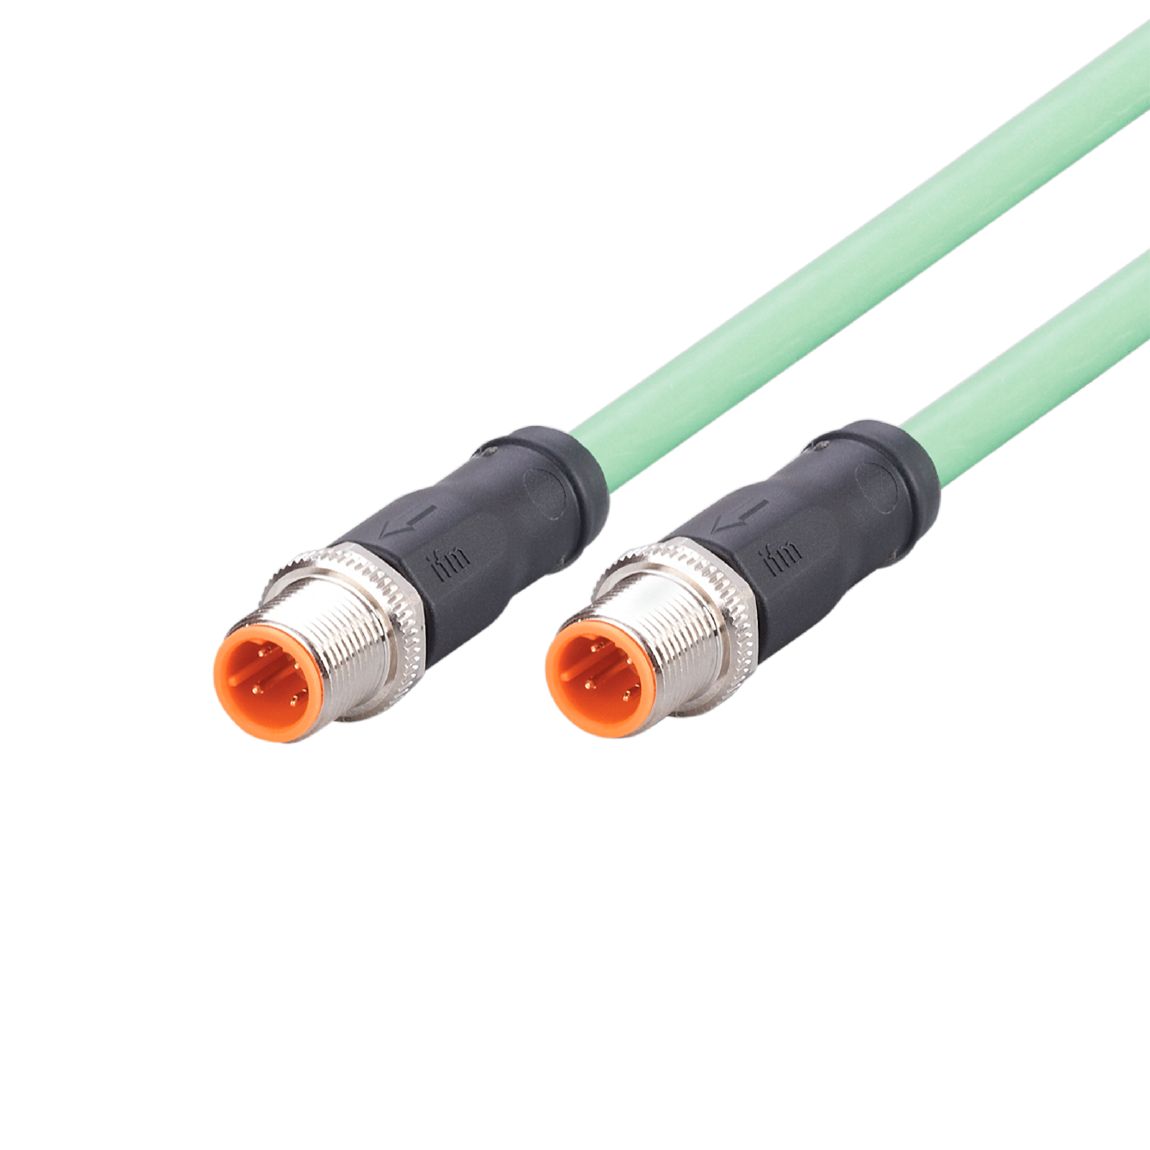 EVC905 - Connection cable - ifm